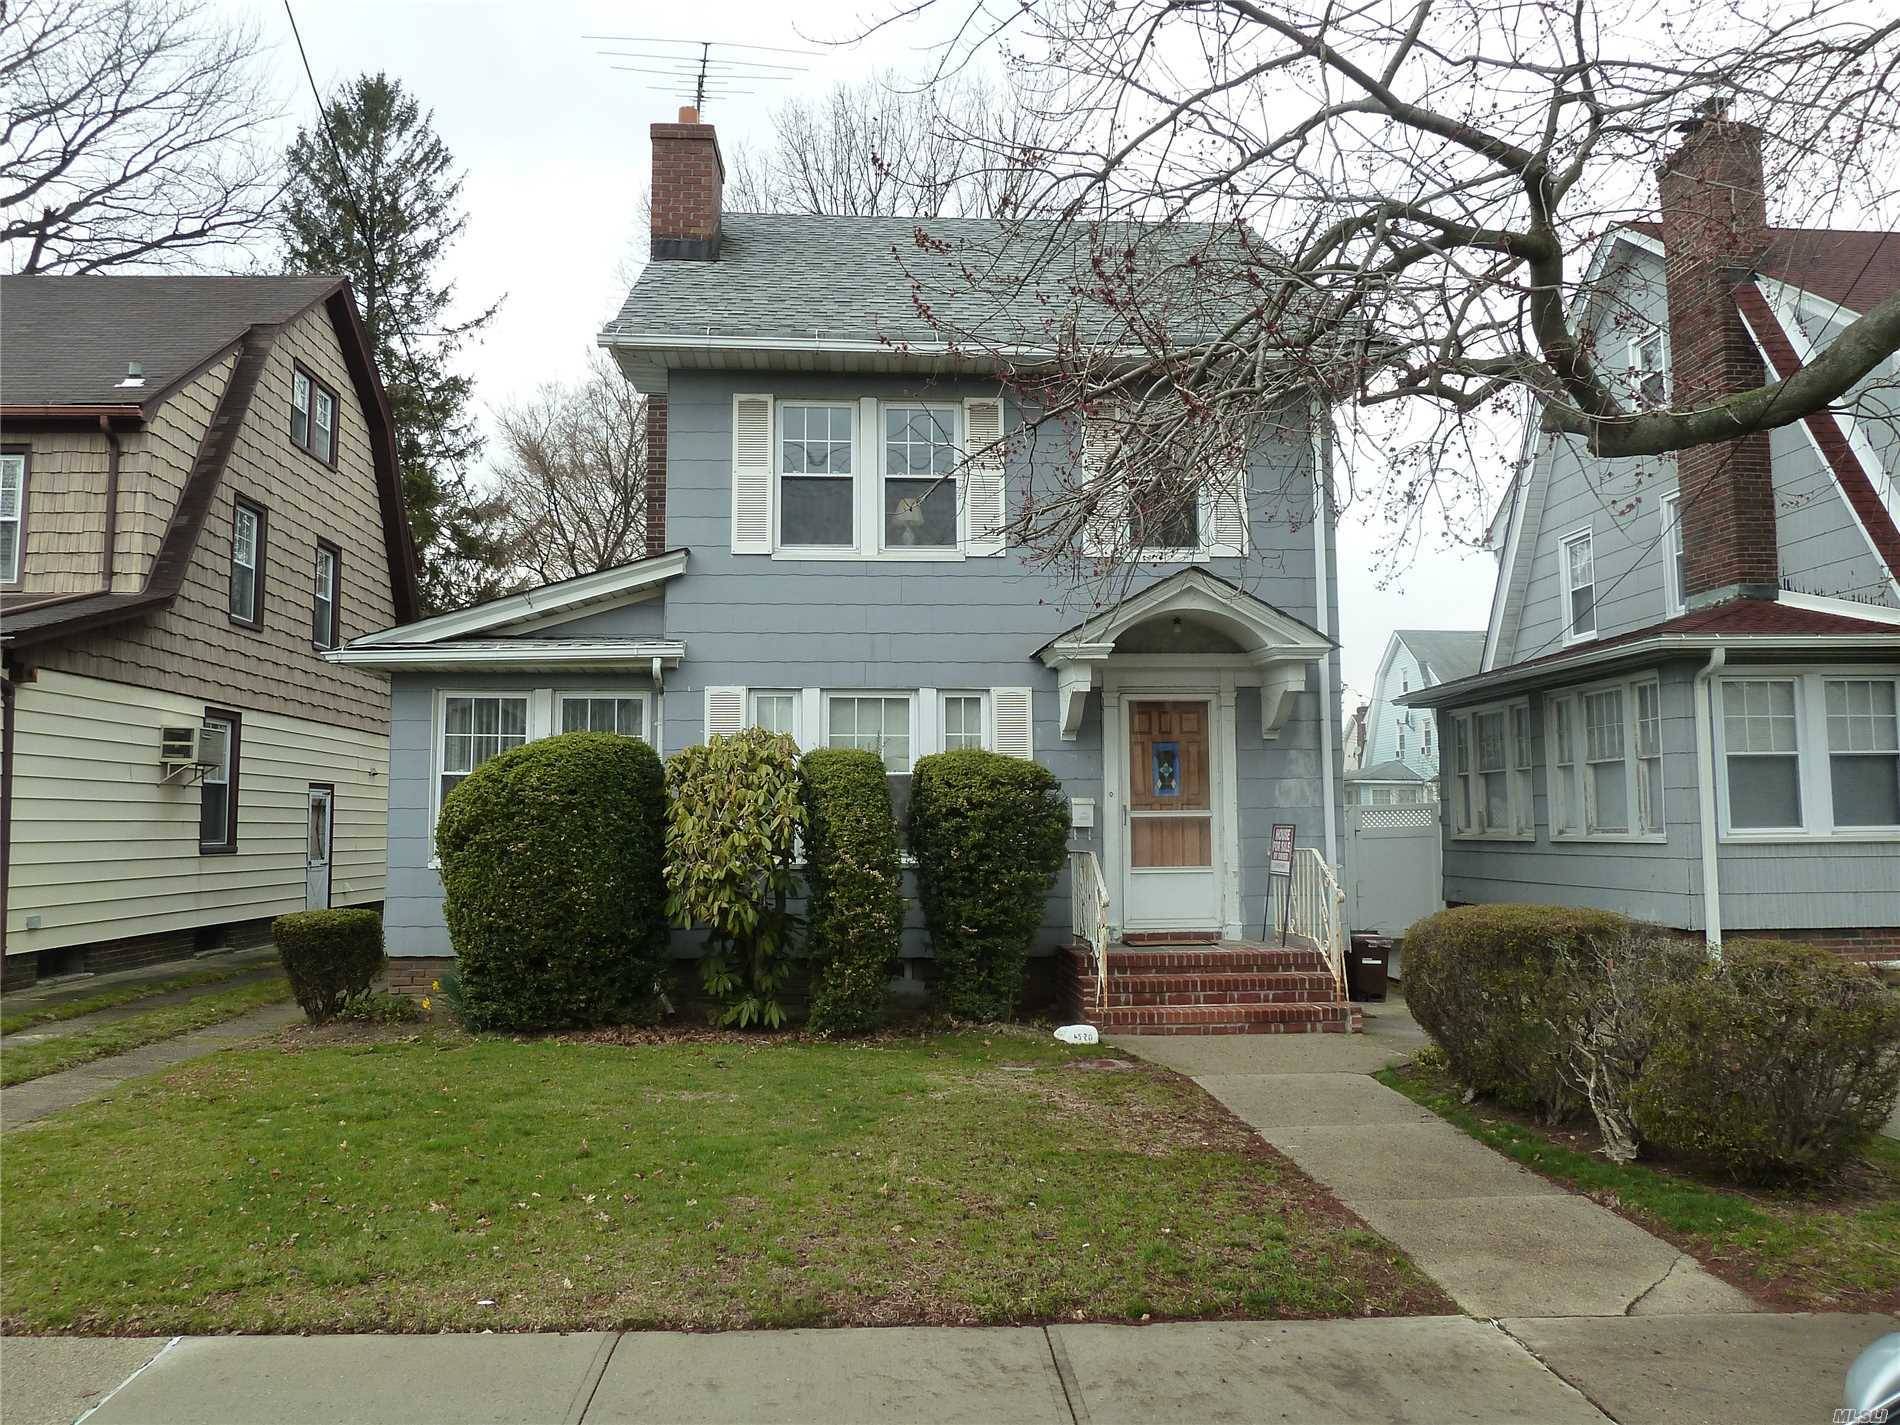 Beautiful Colonial House Situated On A Quiet Tree-Lined Street In The Heart Of Flushing.